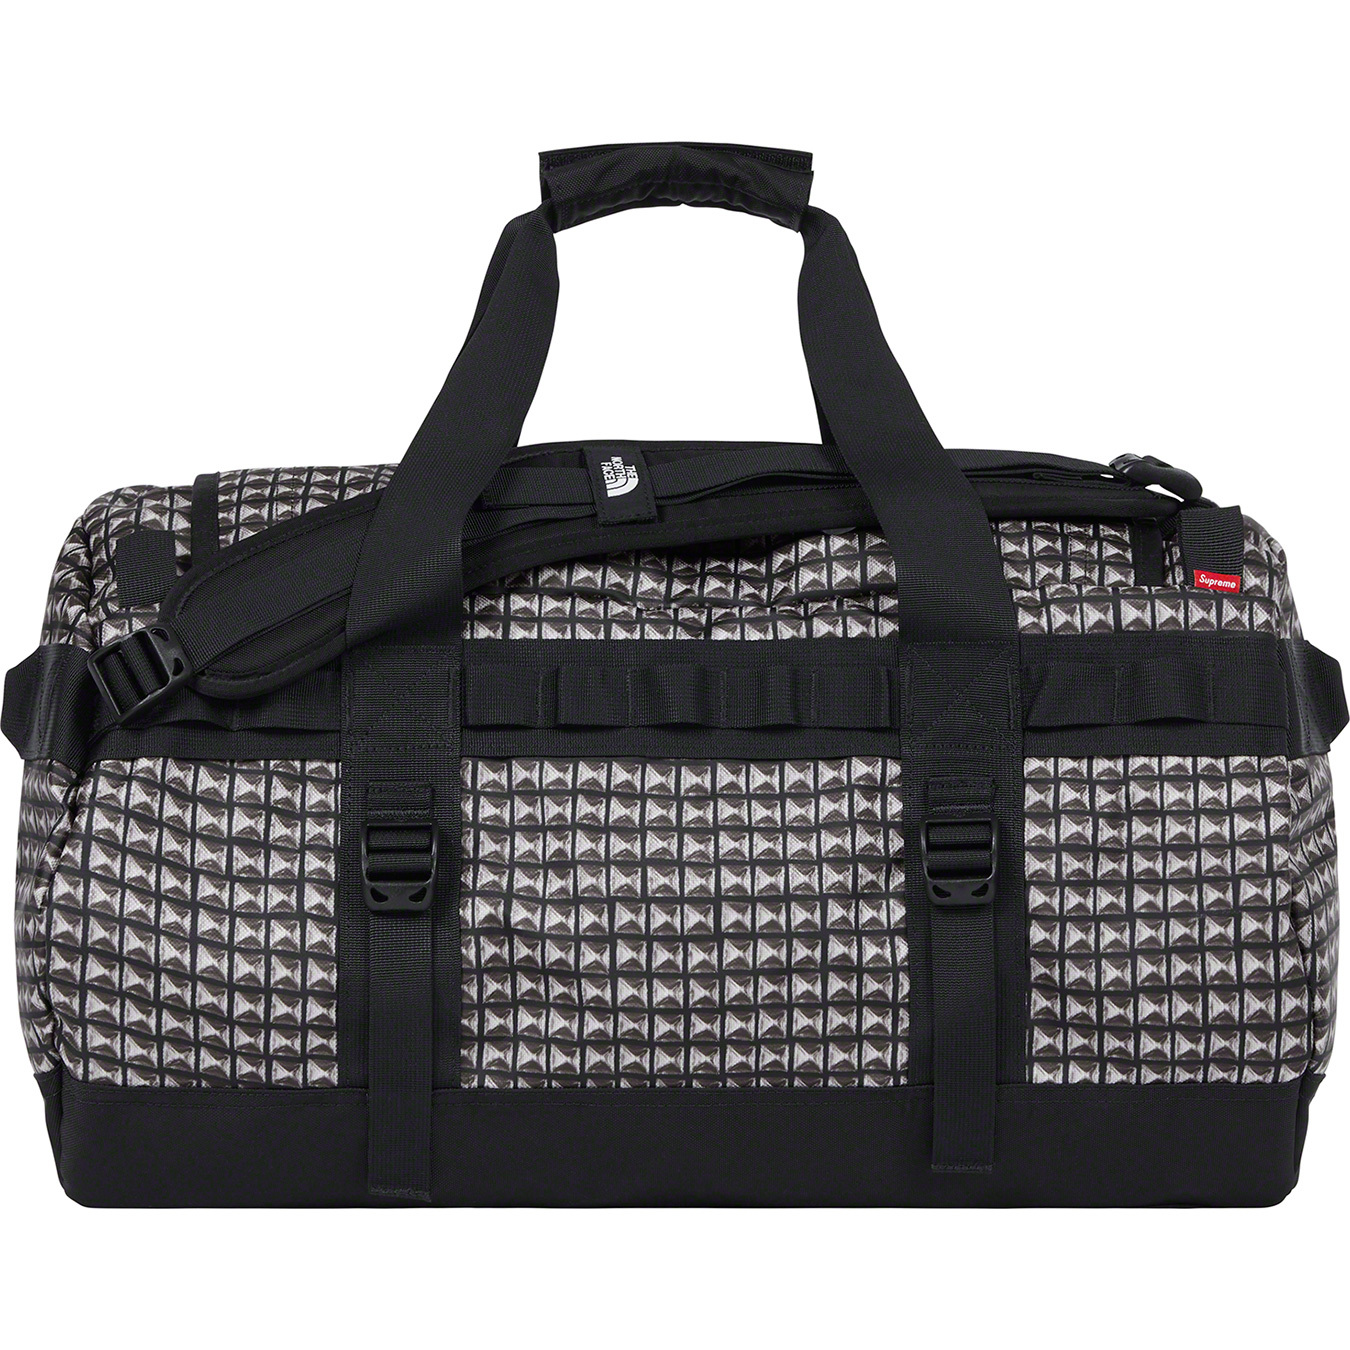 Supreme®/The North Face® Studded Small Base Camp Duffle Bag 